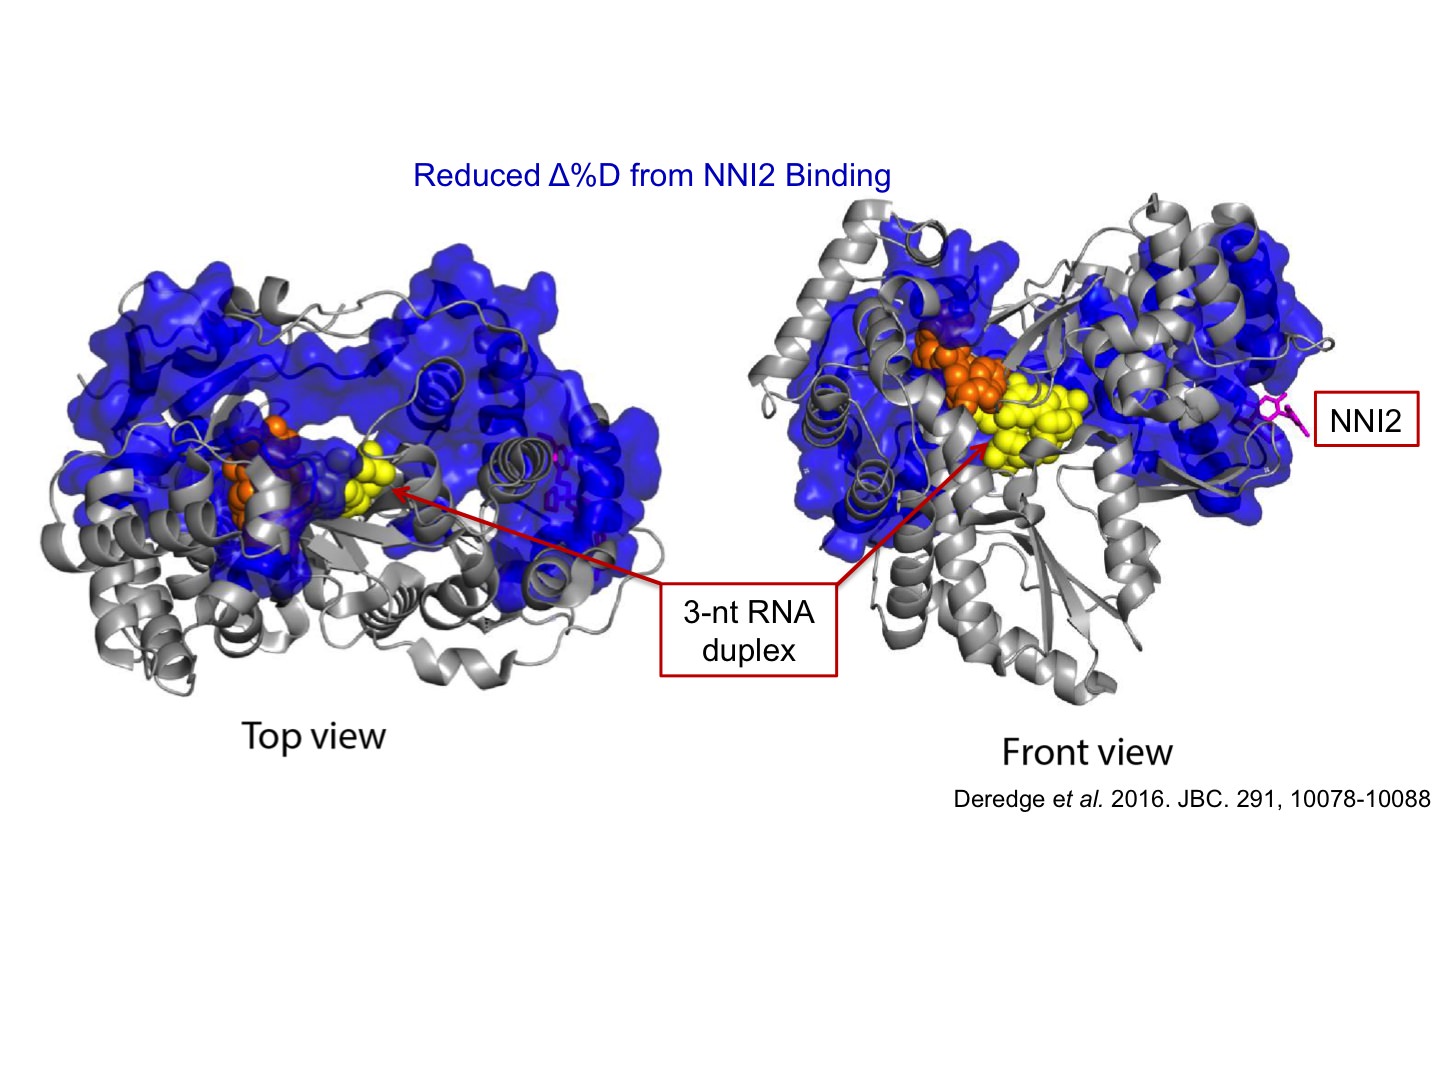 Peptic fragments resulted in significant decrease in HDX upon NNI2 (magenta sticks) binding are shown in dark blue. Rigidification of a large network of enzyme dynamics was observed starting from inhibitor binding site throughout the protein, especially surrounding the enzyme active site, suggesting a long range allosteric effect from inhibitor binding on NS5B conformational change.